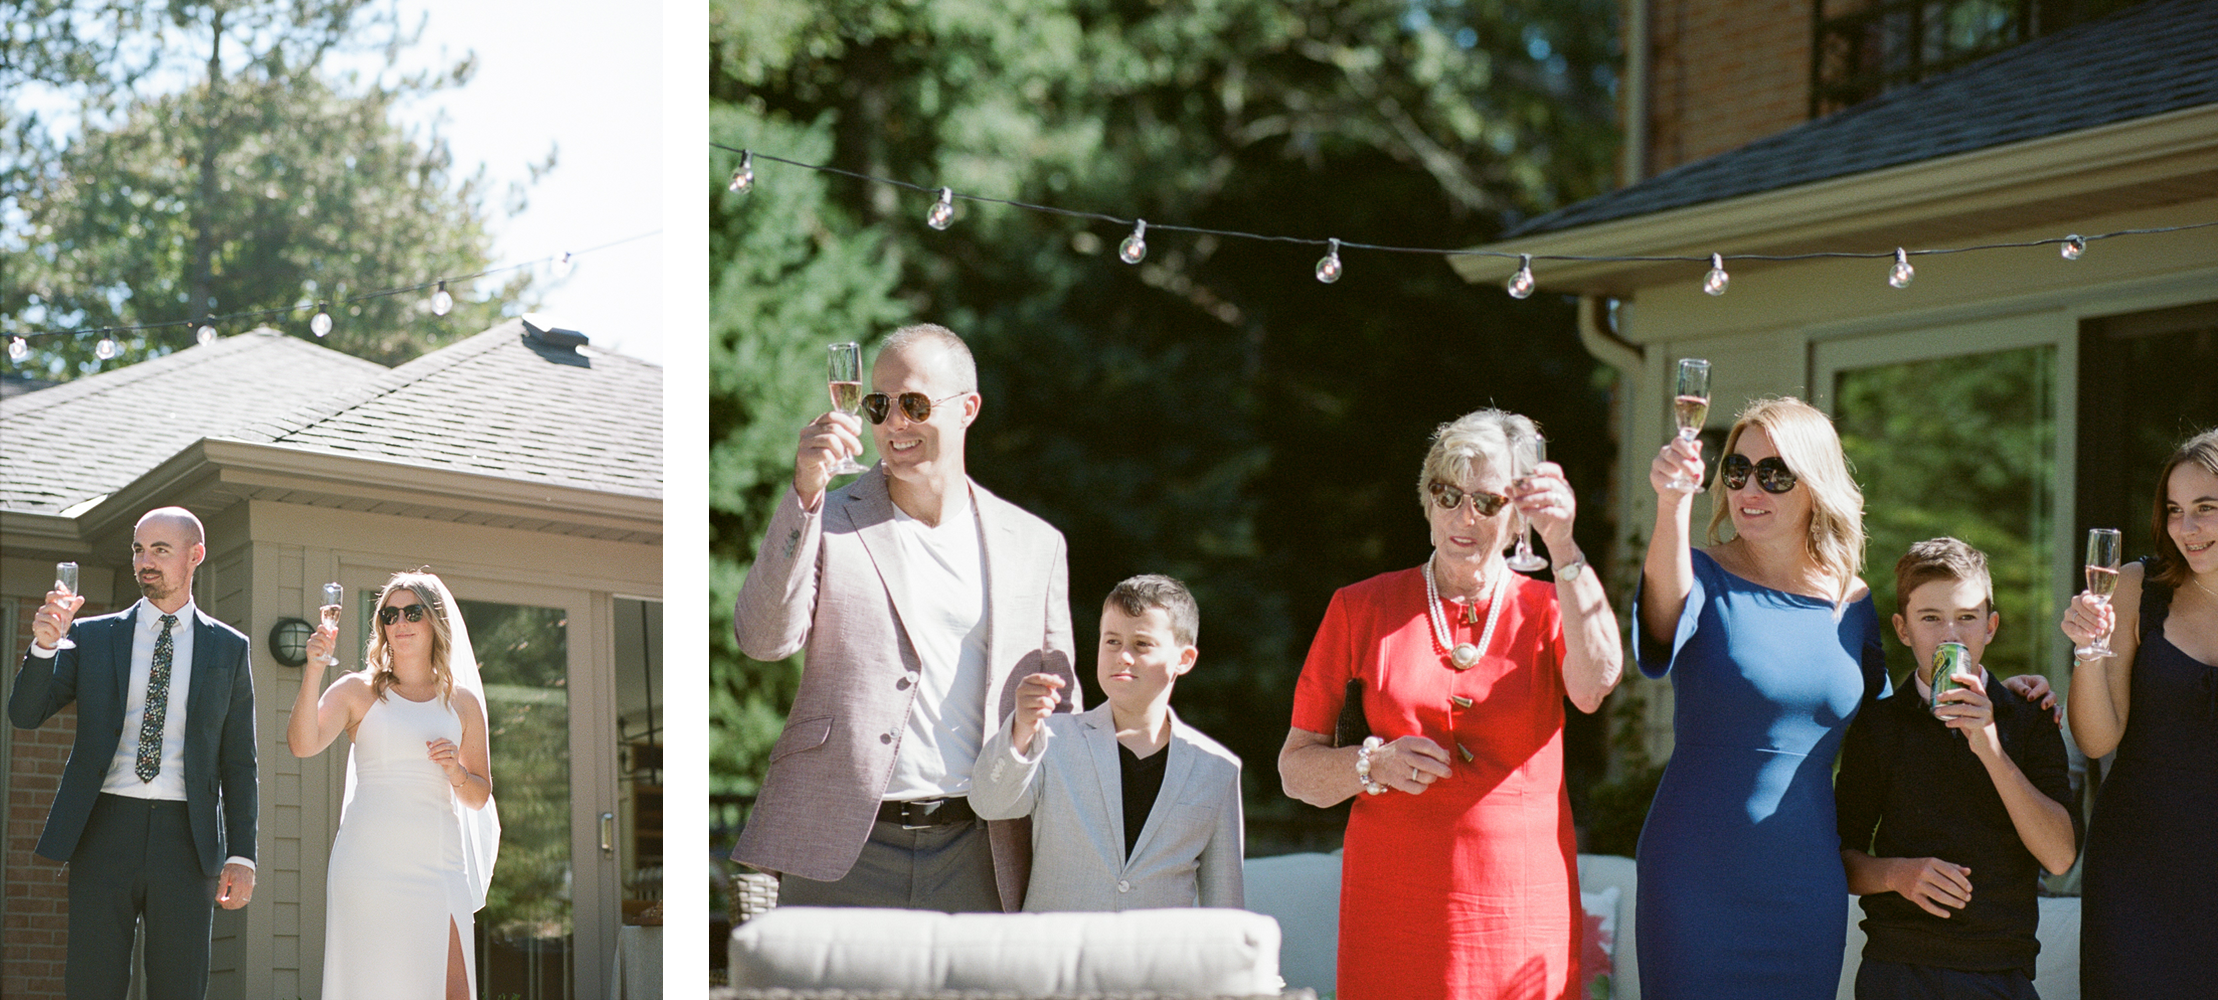 Backyard-Elopement-on-Film-Analog-Pool-Party-53.PNG